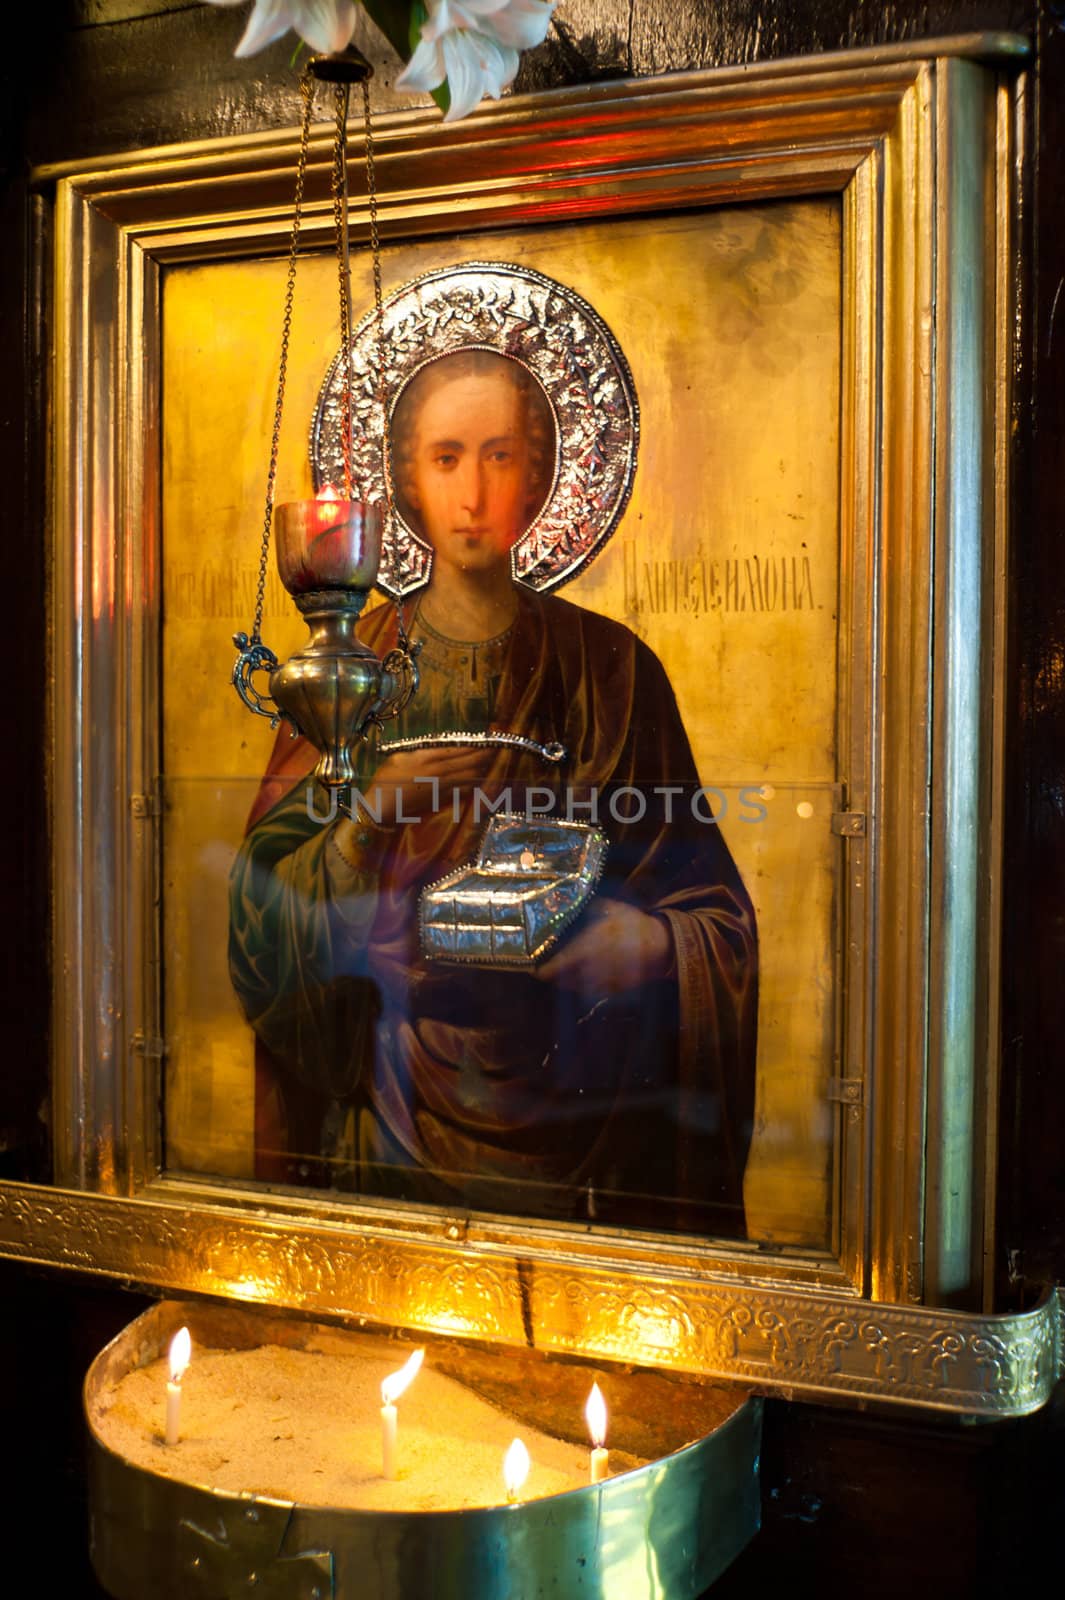 Holy apostle and candles with picture frame in church by oguzdkn